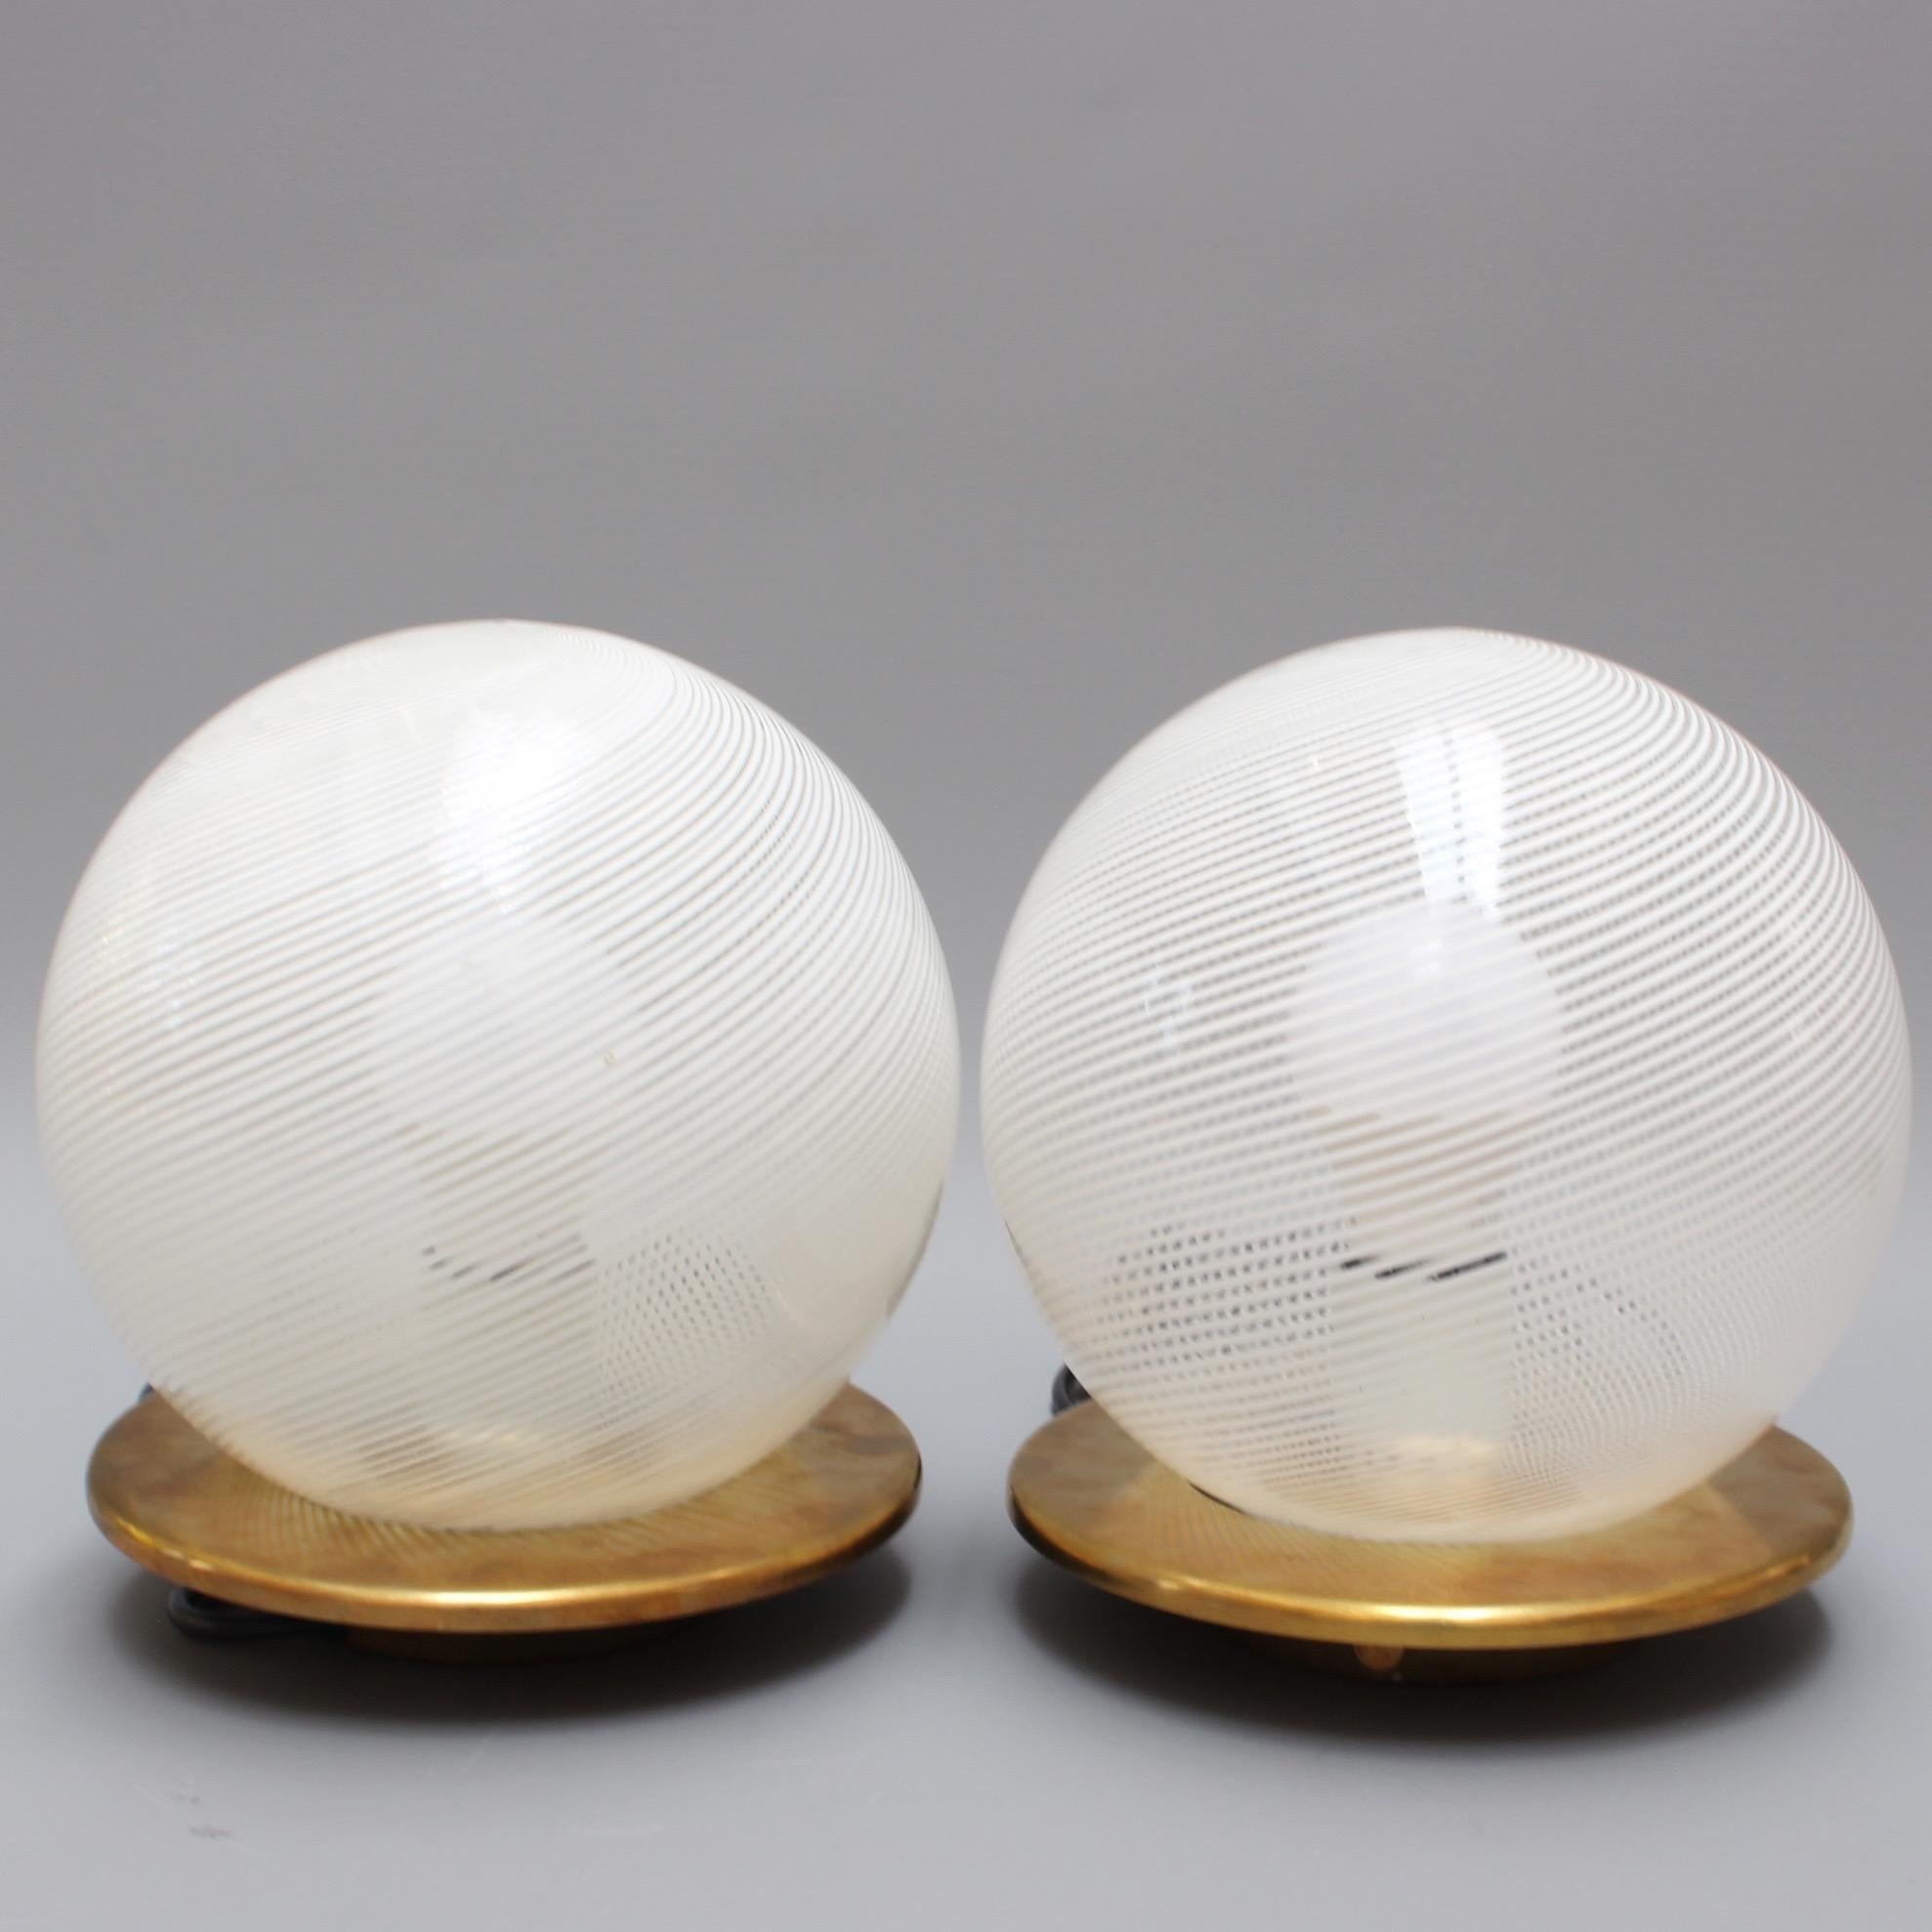 Pair of blown Murano glass globe table lamps (circa 1950s) in the style of Paulo Venini. Modernist and elegant, these blown Murano glass globe lamps provide a source of lighting which is both functional and decorative. The stripe effect was ahead of